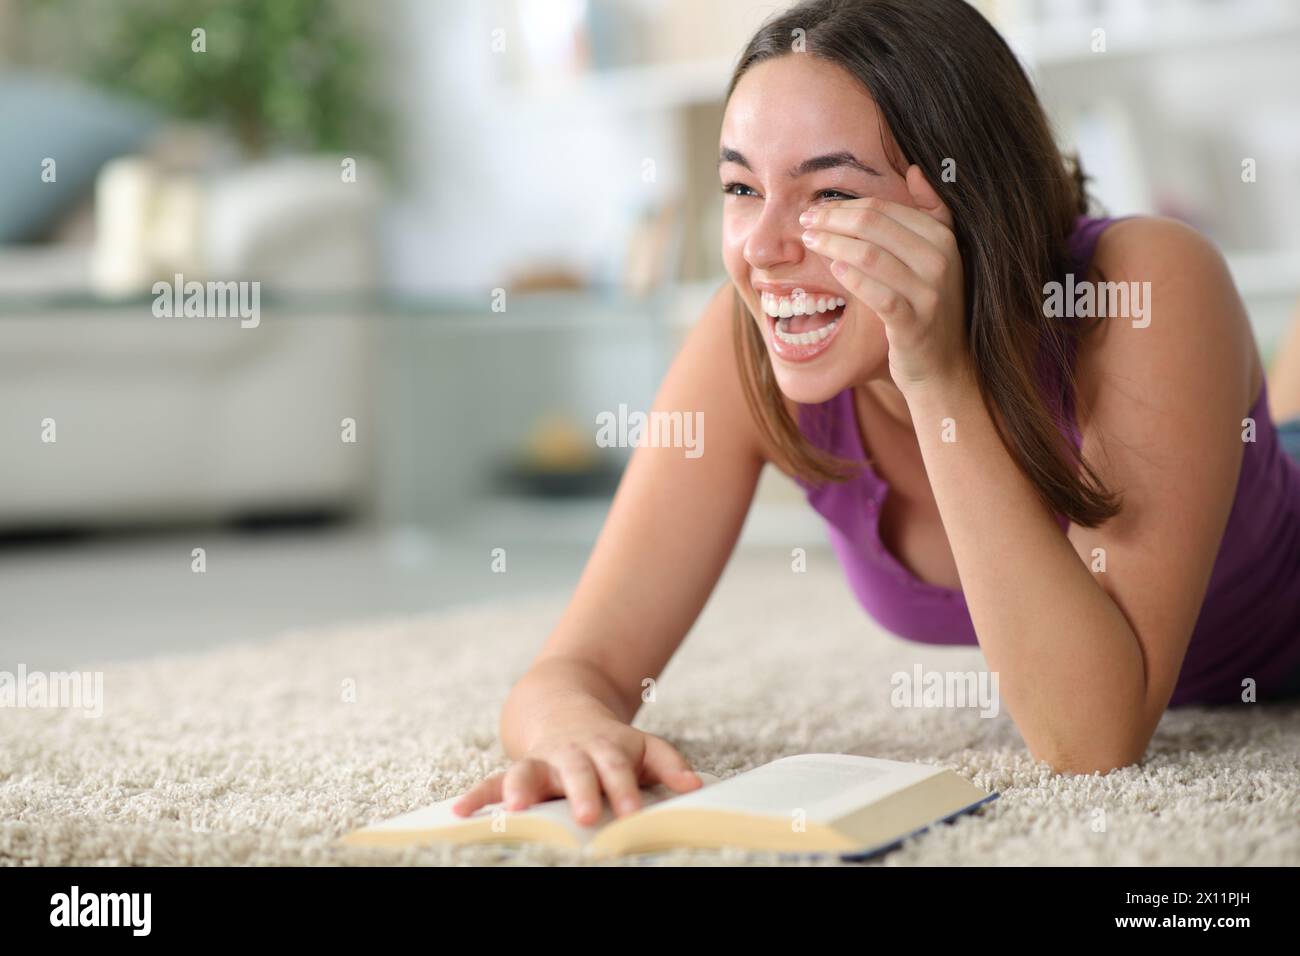 Happy woman laughing hilariously reading a comedy paper book lying on the floor at home Stock Photo